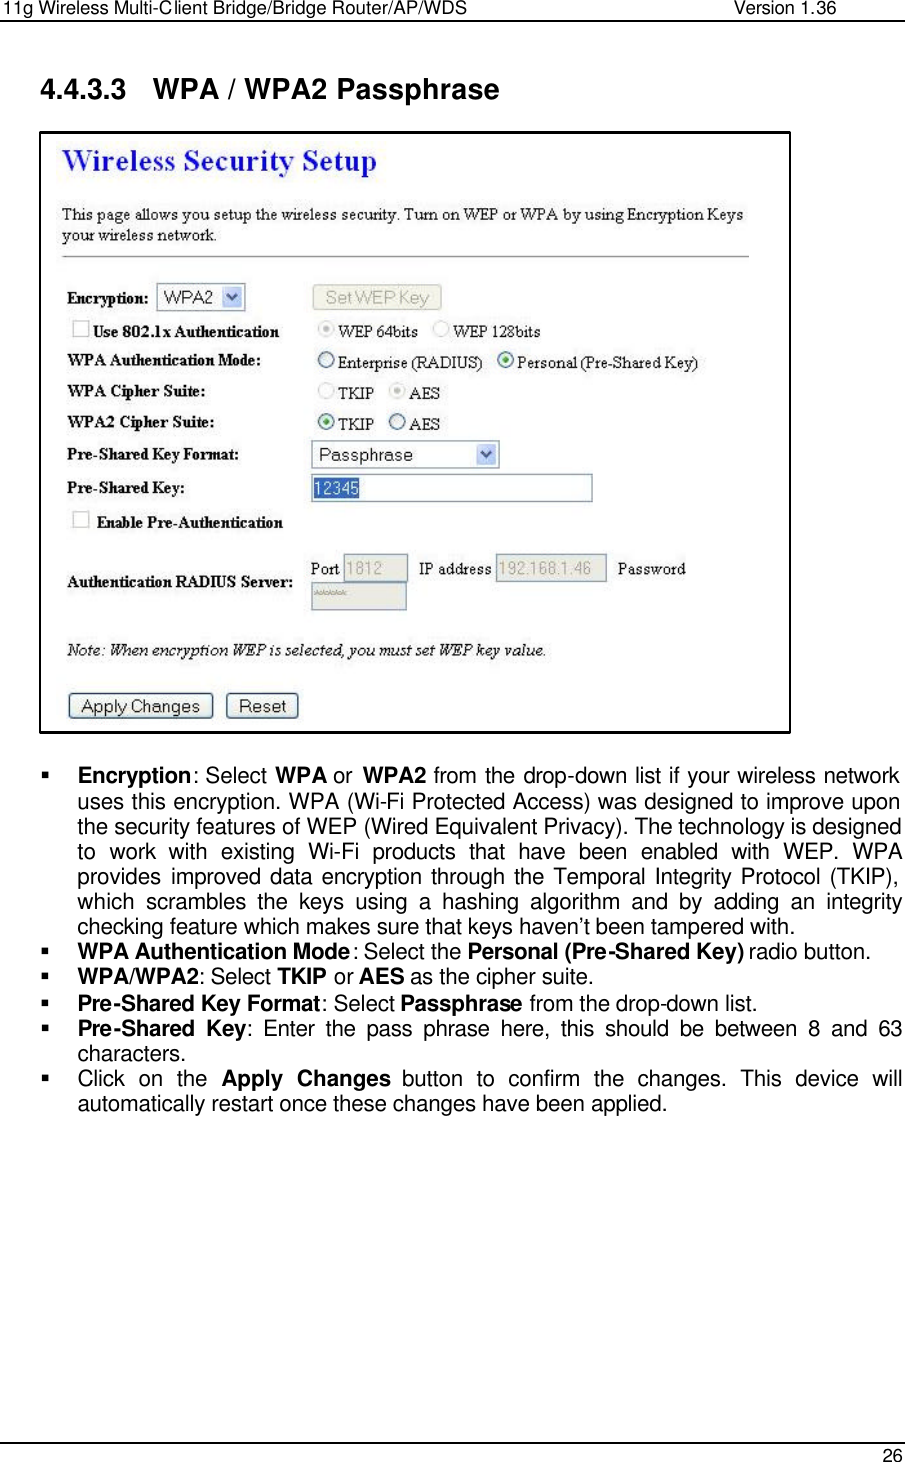 11g Wireless Multi-Client Bridge/Bridge Router/AP/WDS                                                   Version 1.36    26  4.4.3.3 WPA / WPA2 Passphrase                          § Encryption: Select WPA or  WPA2 from the drop-down list if your wireless network uses this encryption. WPA (Wi-Fi Protected Access) was designed to improve upon the security features of WEP (Wired Equivalent Privacy). The technology is designed to work with existing Wi-Fi products that have been enabled with WEP. WPA provides improved data encryption through the Temporal Integrity Protocol (TKIP), which scrambles the keys using a hashing algorithm and by adding an integrity checking feature which makes sure that keys haven’t been tampered with.  § WPA Authentication Mode: Select the Personal (Pre-Shared Key) radio button.  § WPA/WPA2: Select TKIP or AES as the cipher suite.  § Pre-Shared Key Format: Select Passphrase from the drop-down list.  § Pre-Shared Key: Enter the pass phrase here, this should be between 8 and 63 characters.  § Click on the Apply Changes button to confirm the changes. This device will automatically restart once these changes have been applied.             